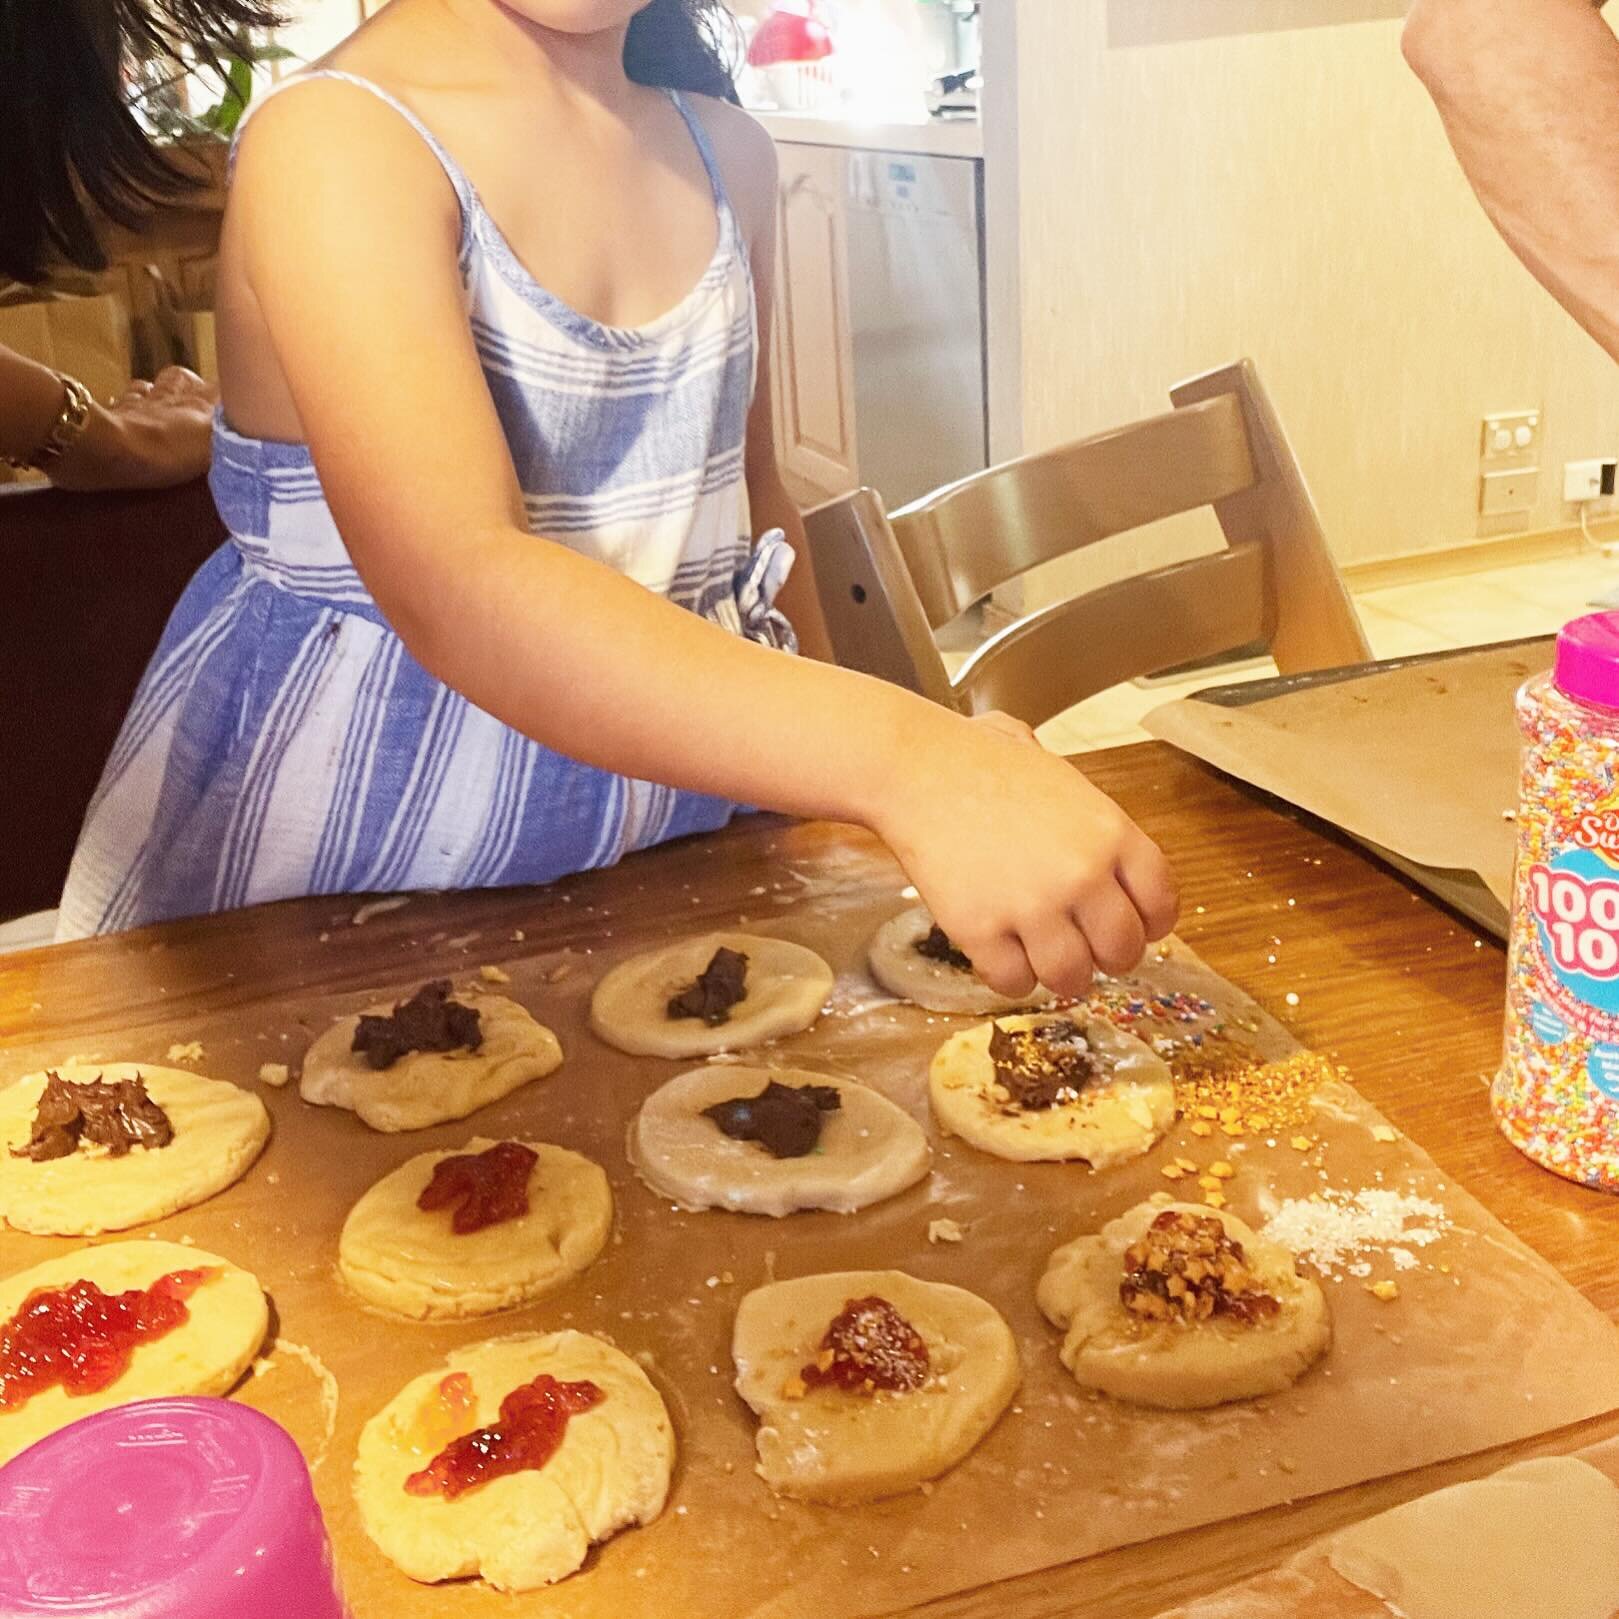 It&rsquo;s messy business, but wouldn&rsquo;t change a thing. #HappyPurim #traditions #hamantaschen